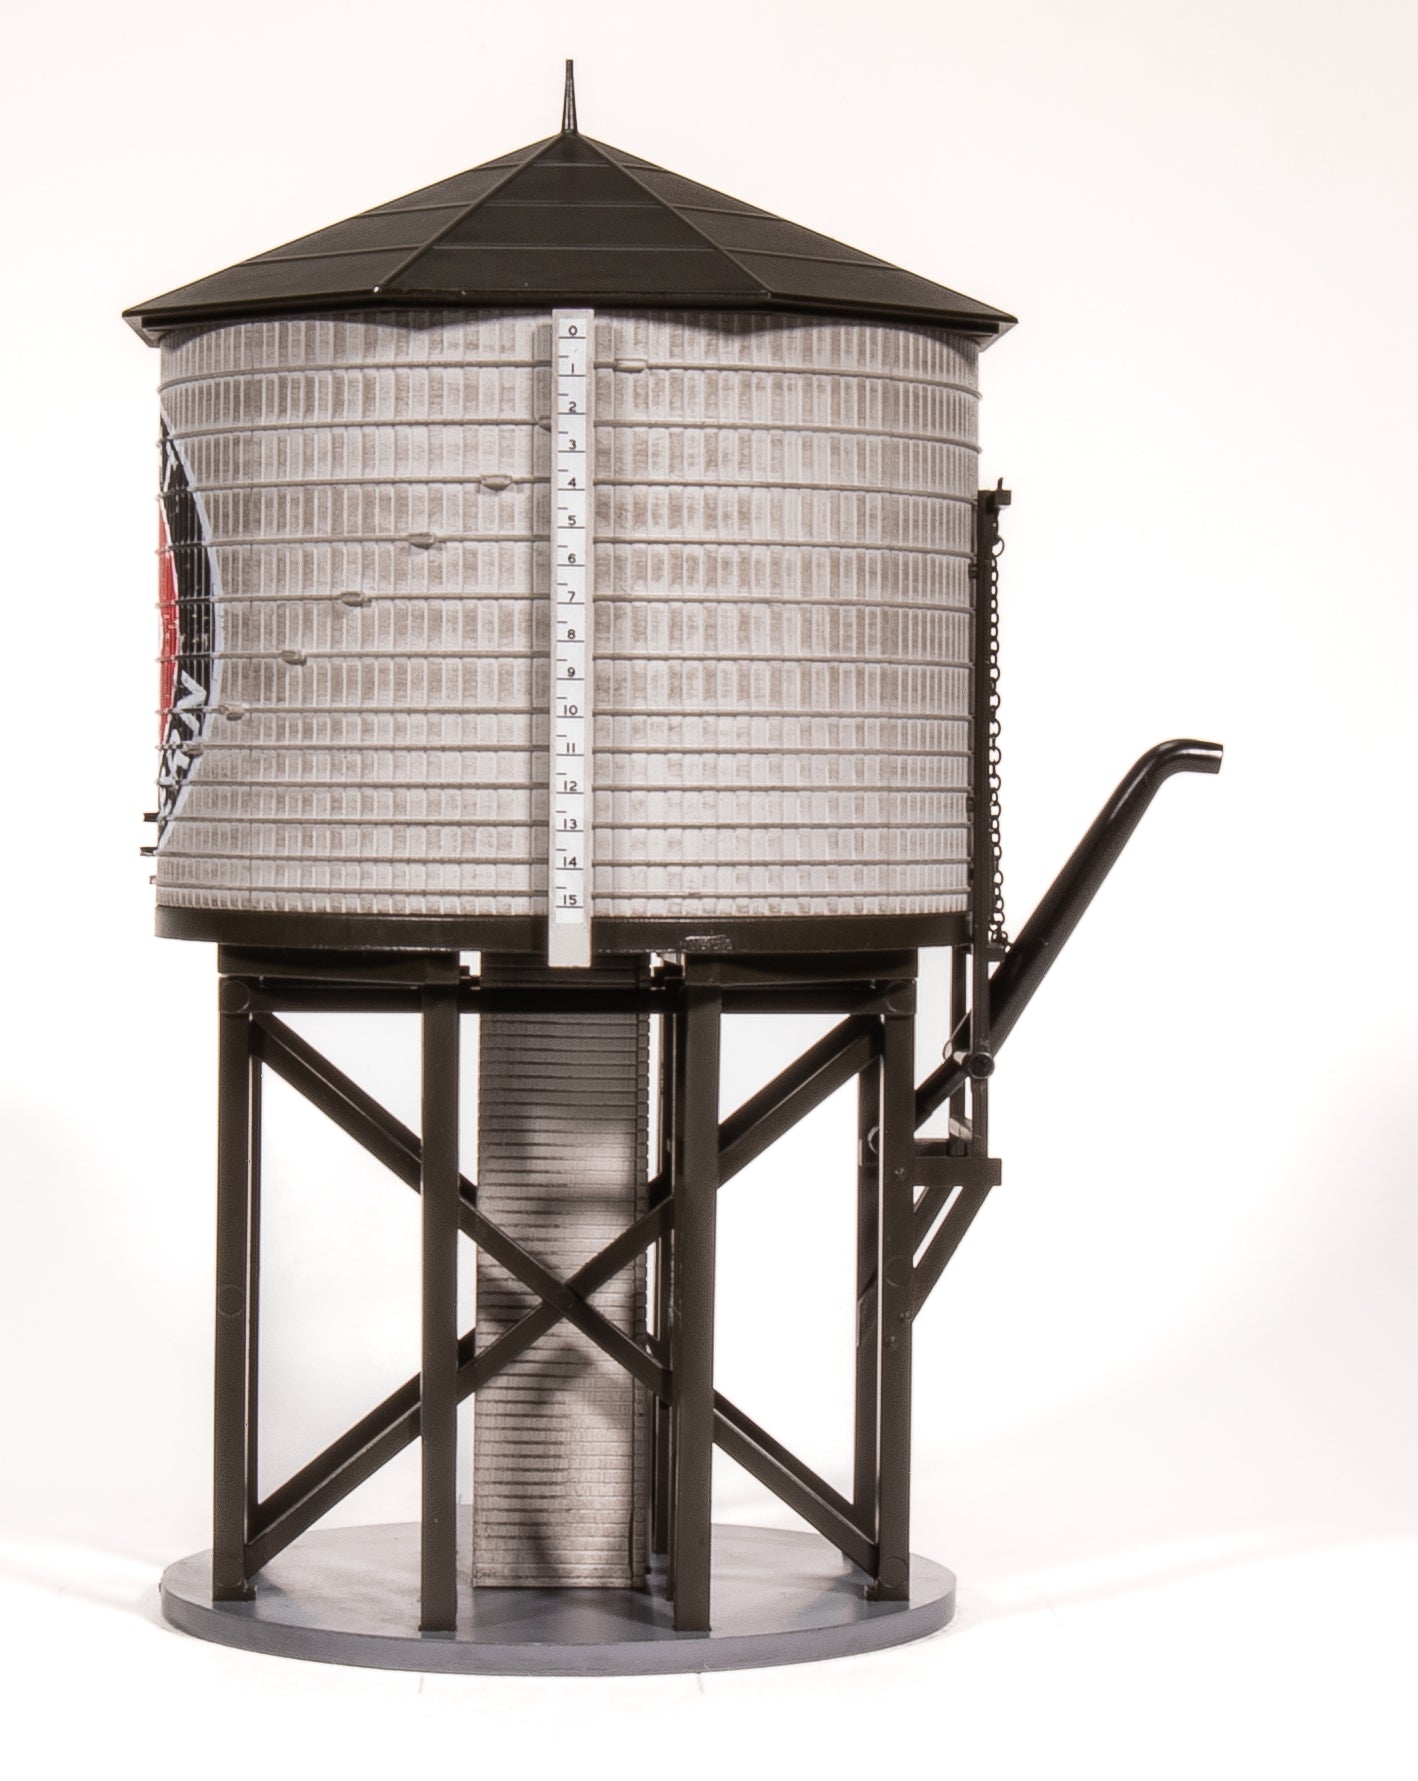 7918 Operating Water Tower w/ Sound, GN, Weathered, HO Default Title